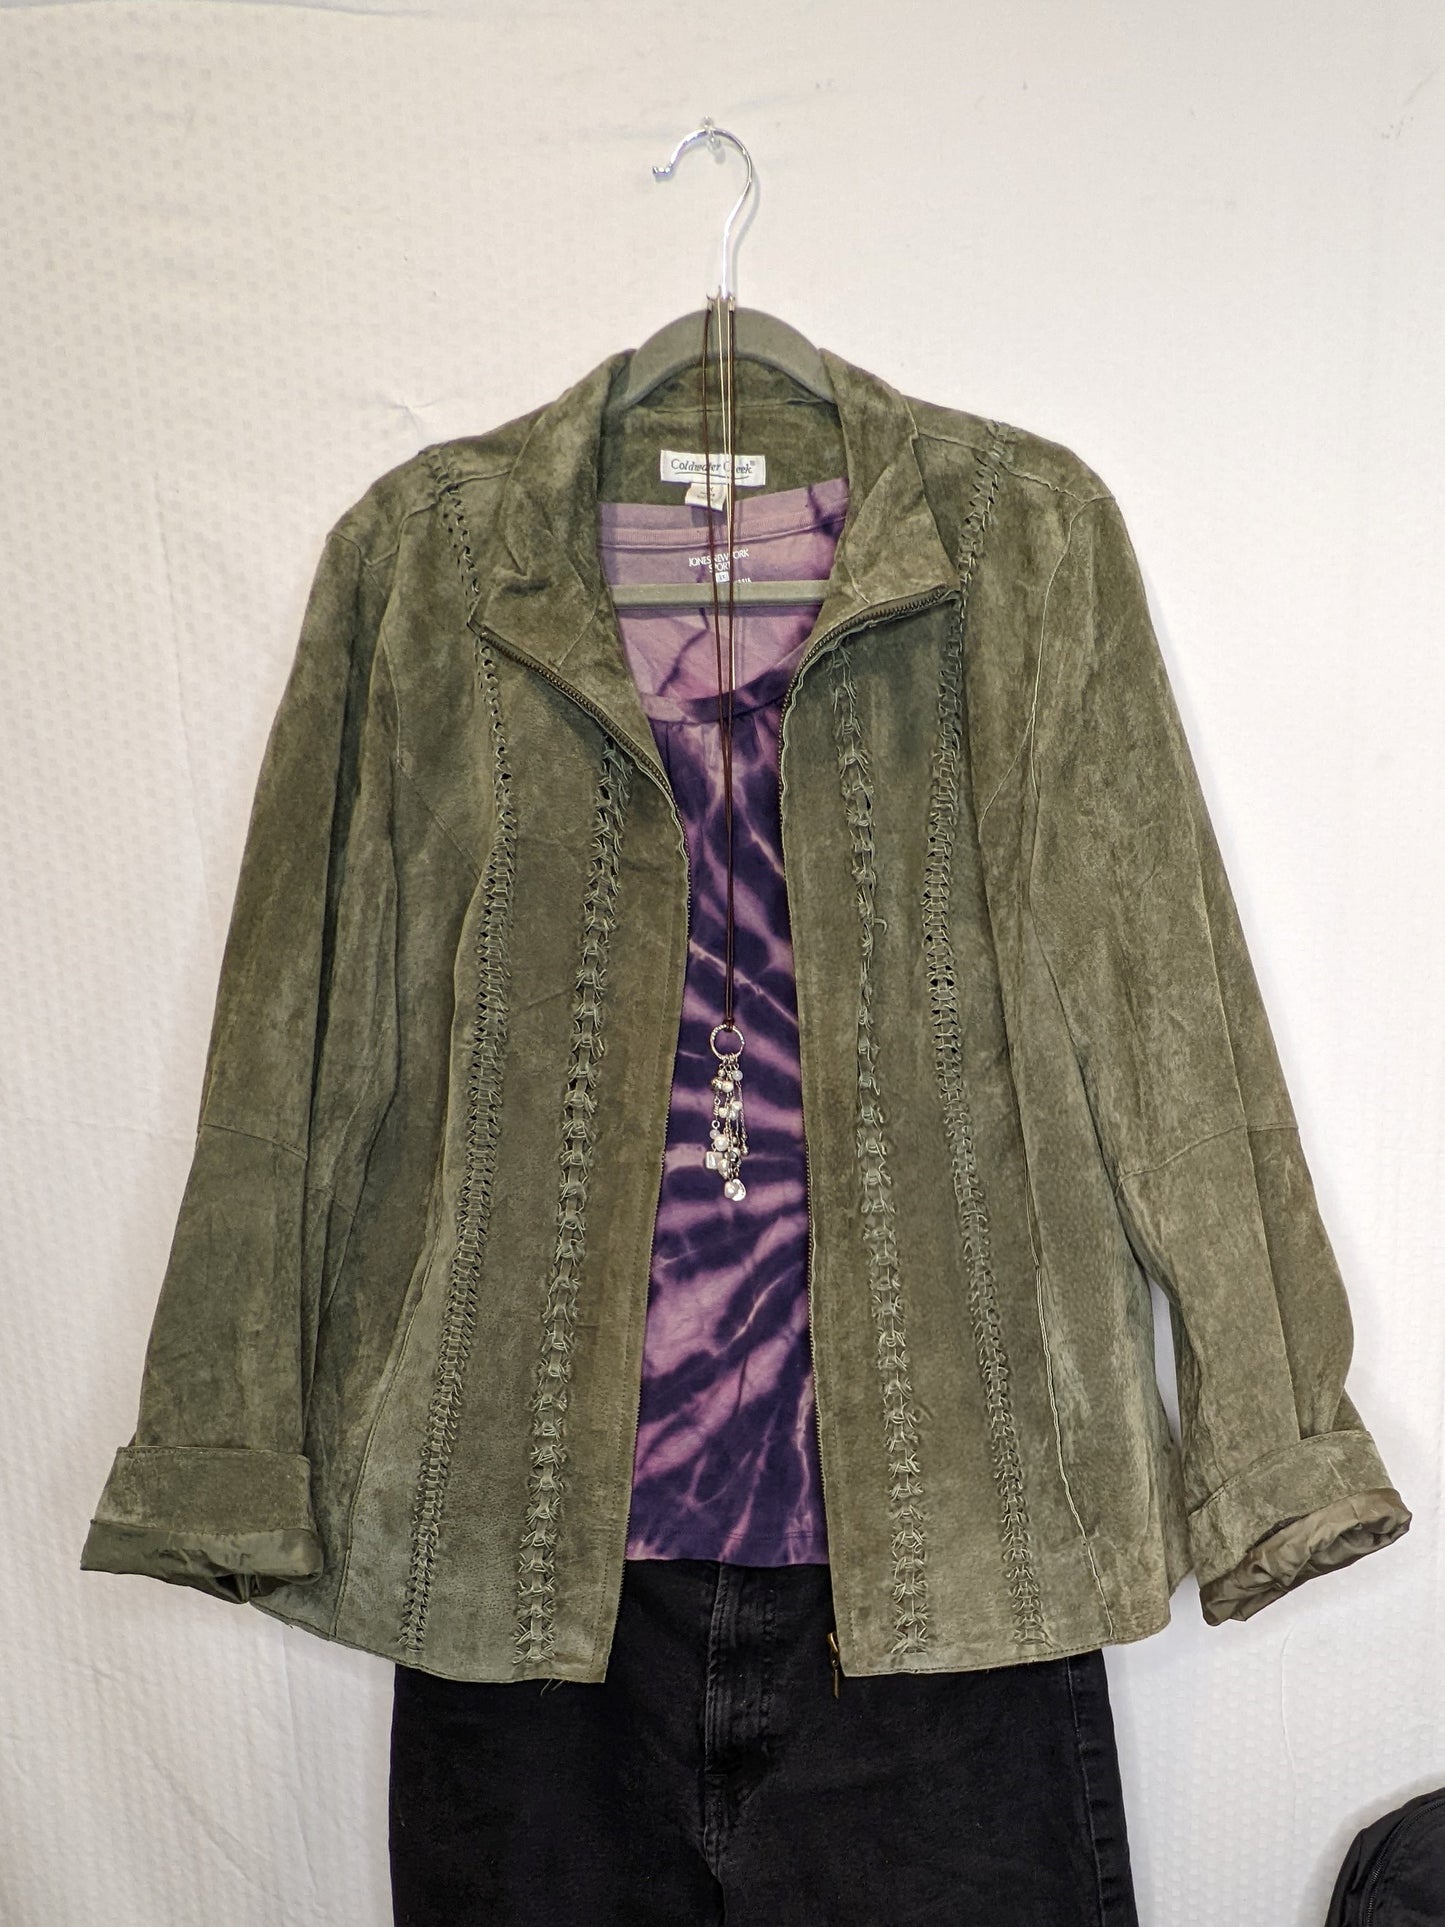 Coldwater Creek Olive Green Boho Suede Leather Braided Jacket - XL